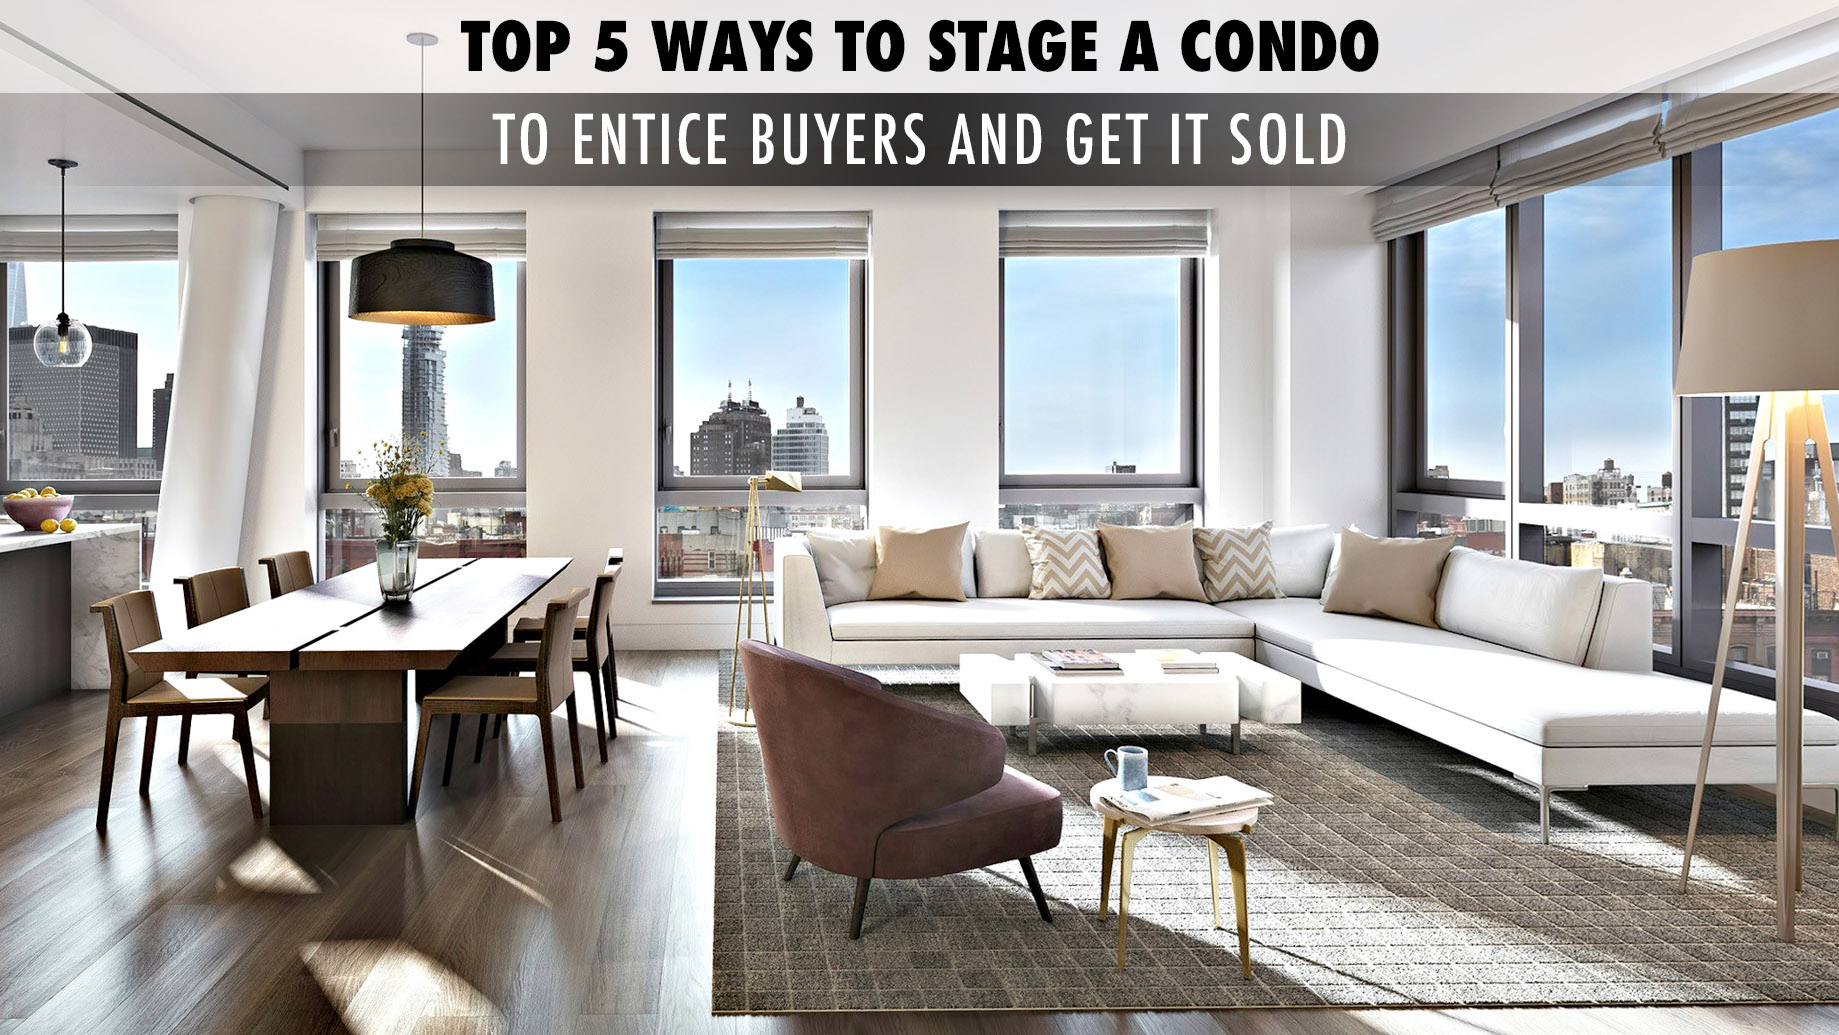 Top 5 Ways to Stage a Condo to Entice Buyers and Get it Sold